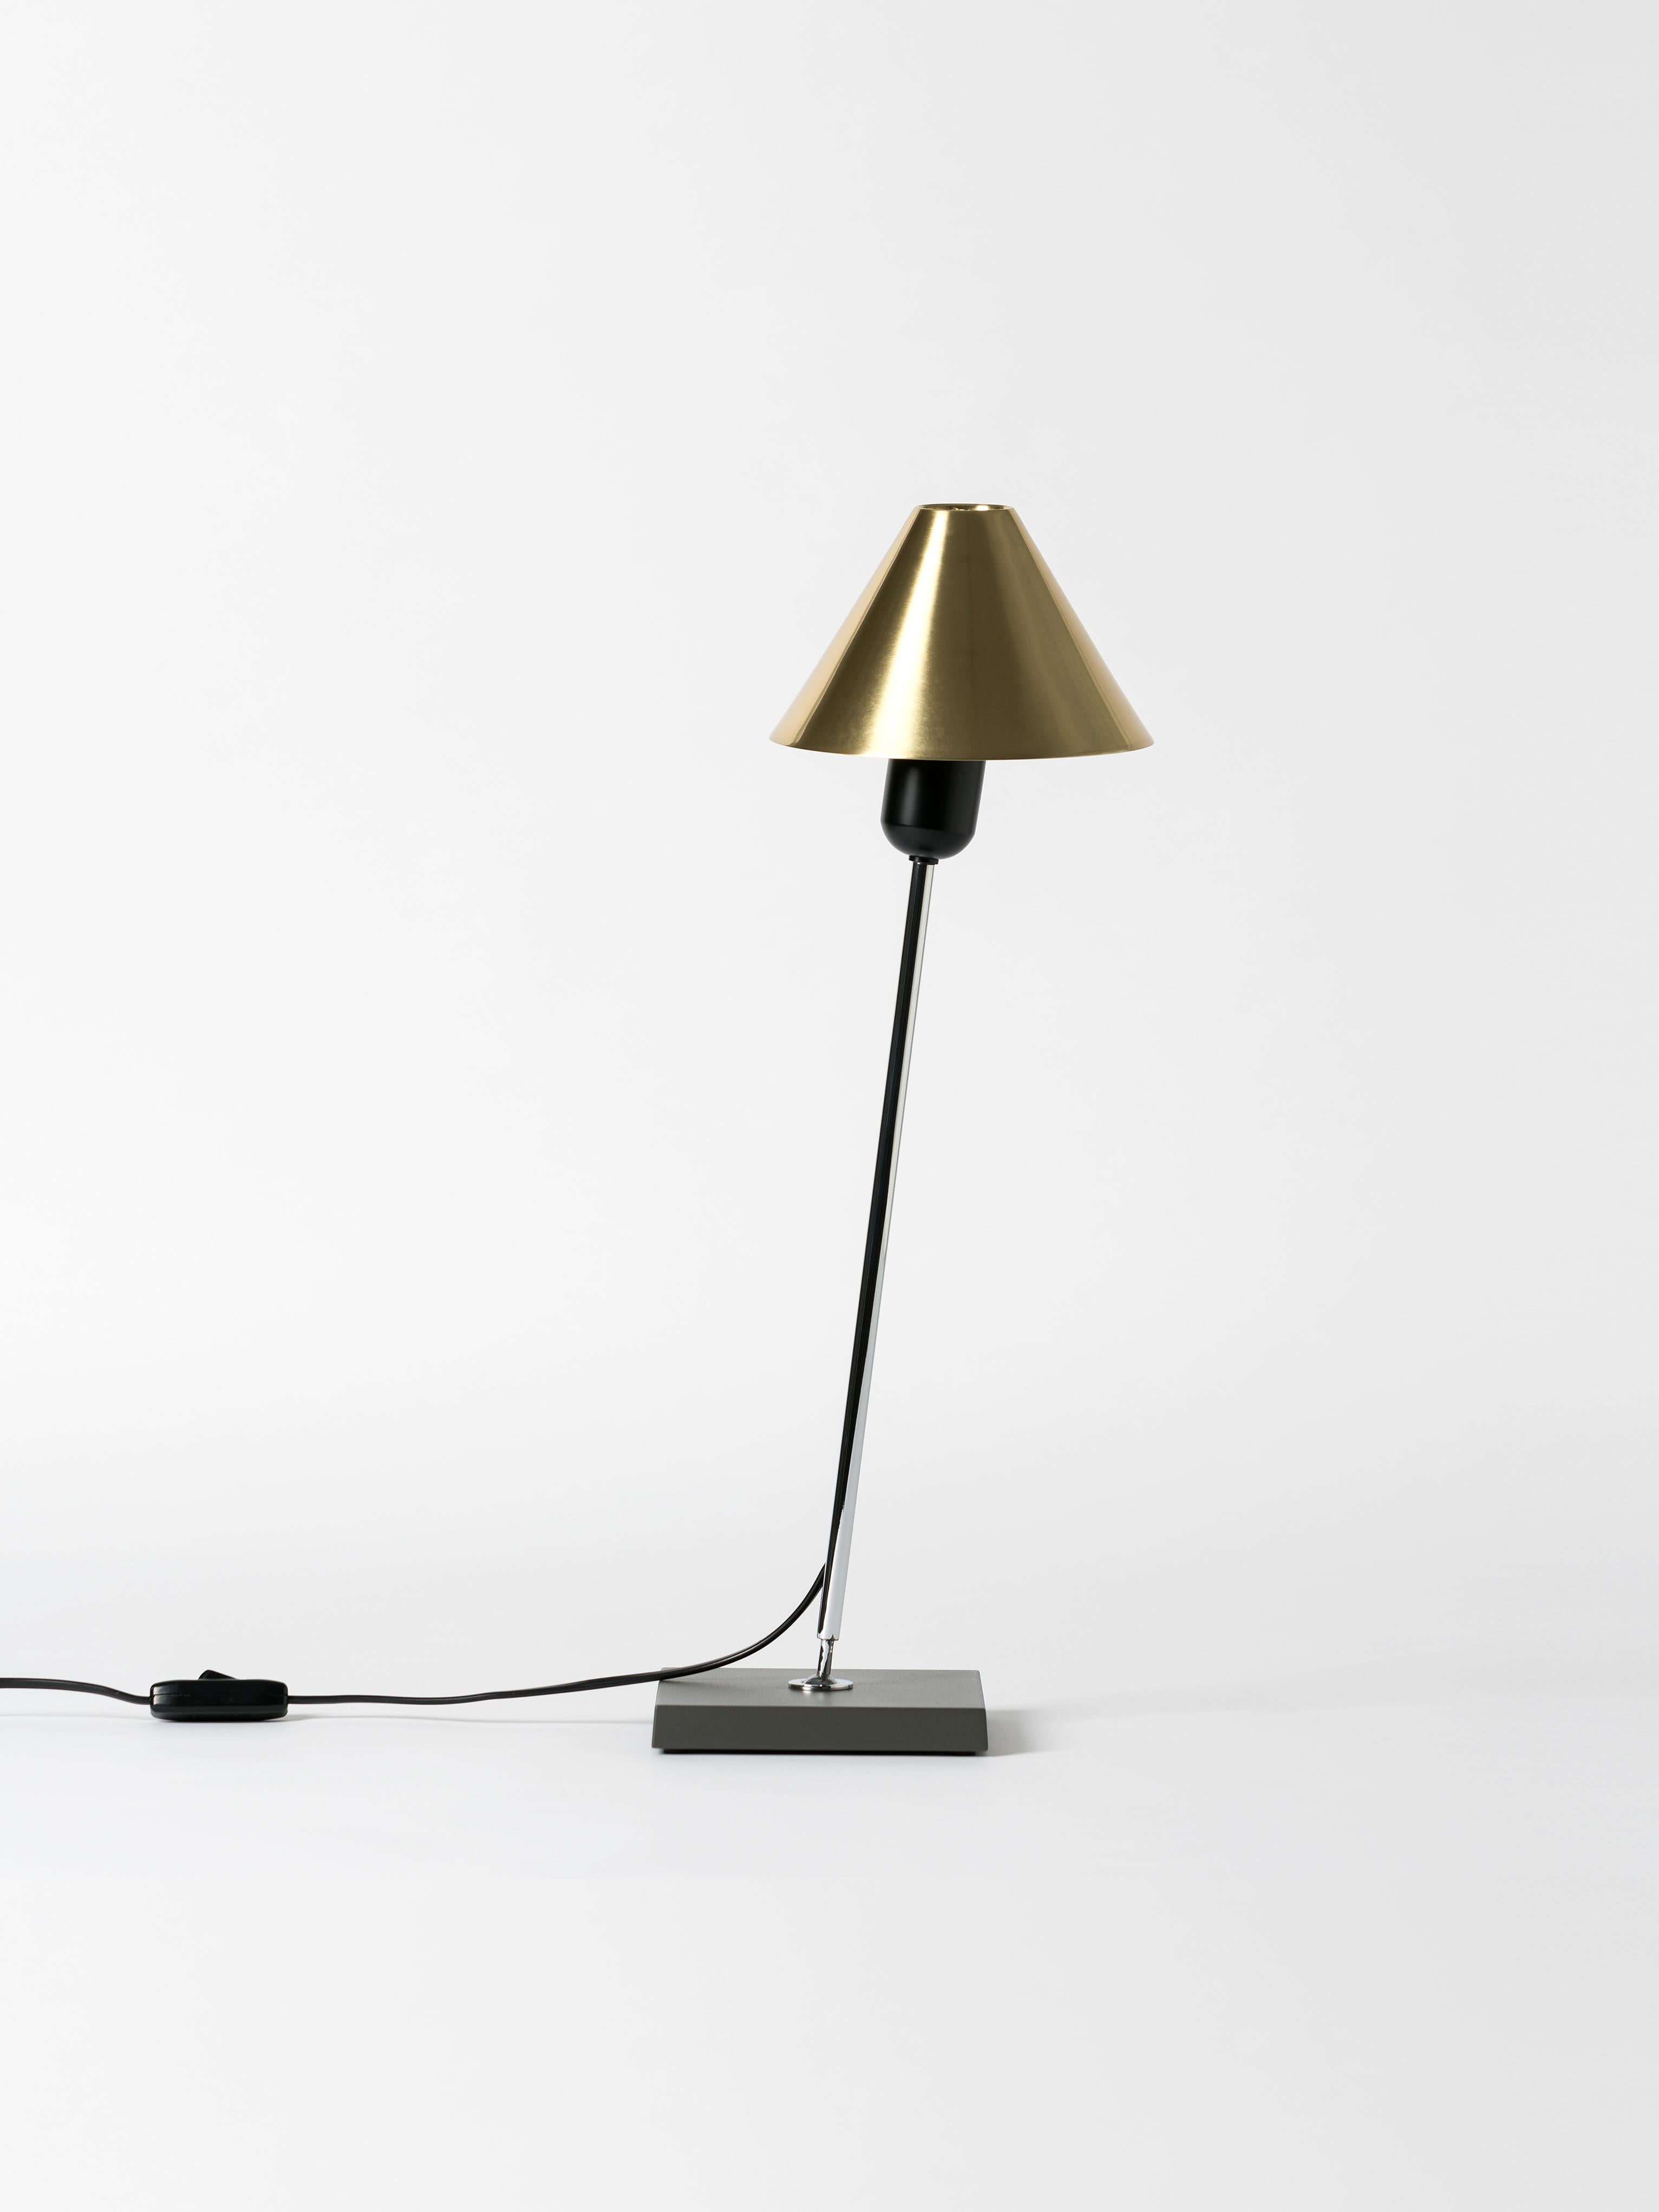 Brass Gira table lamp by Miguel Milá
Dimensions: D 16 x H 54 cm
Materials: Brass, metal.
Available in 3 colors: Aluminum, black and brass.

The Gira lamp has all the simplicity and the profile of a classic. This lamp encapsulates all the